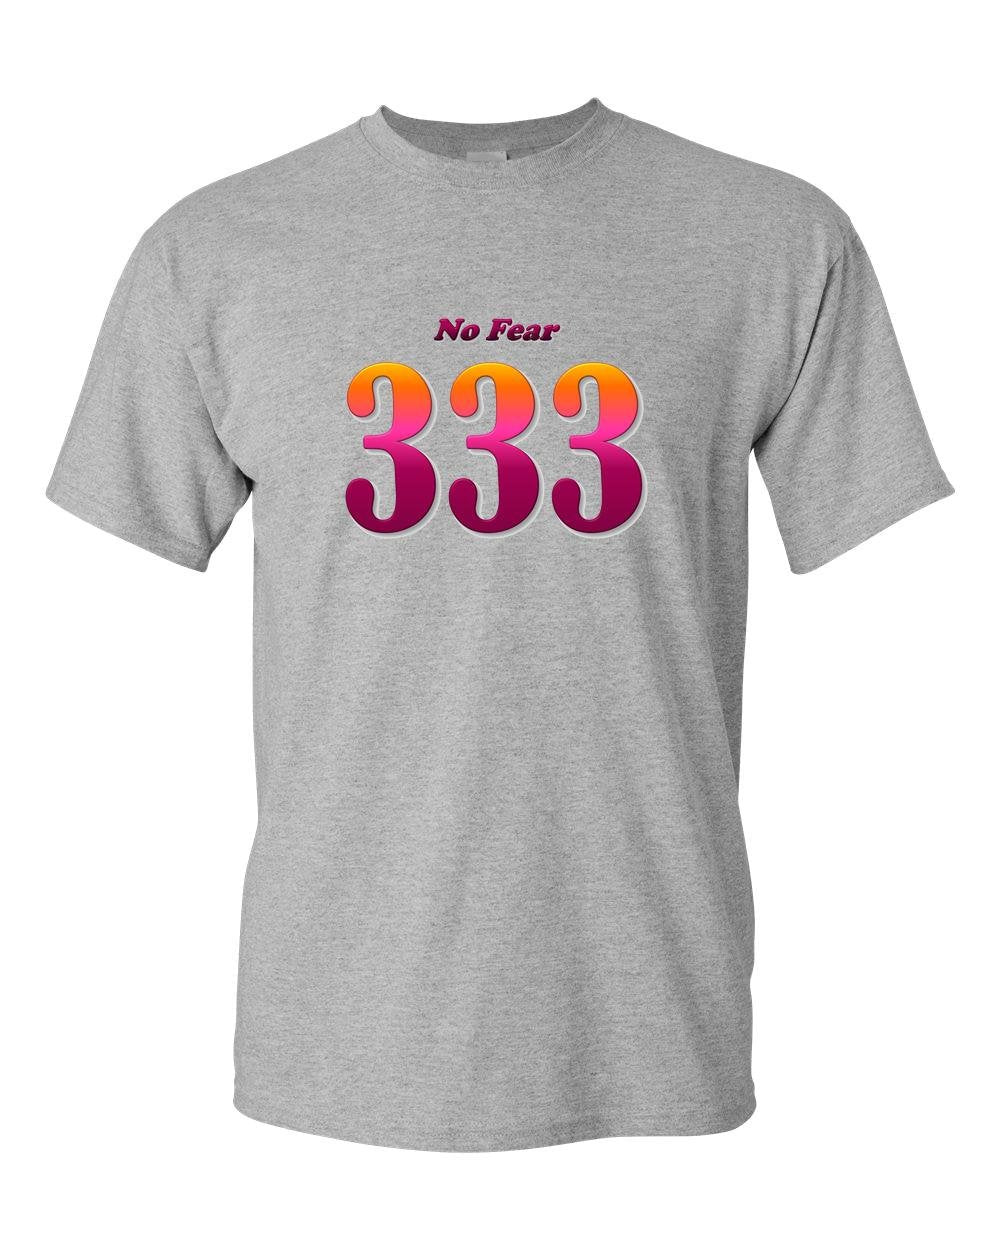 Angel Numbers - No Fear 333 - Adult Unisex T-Shirt